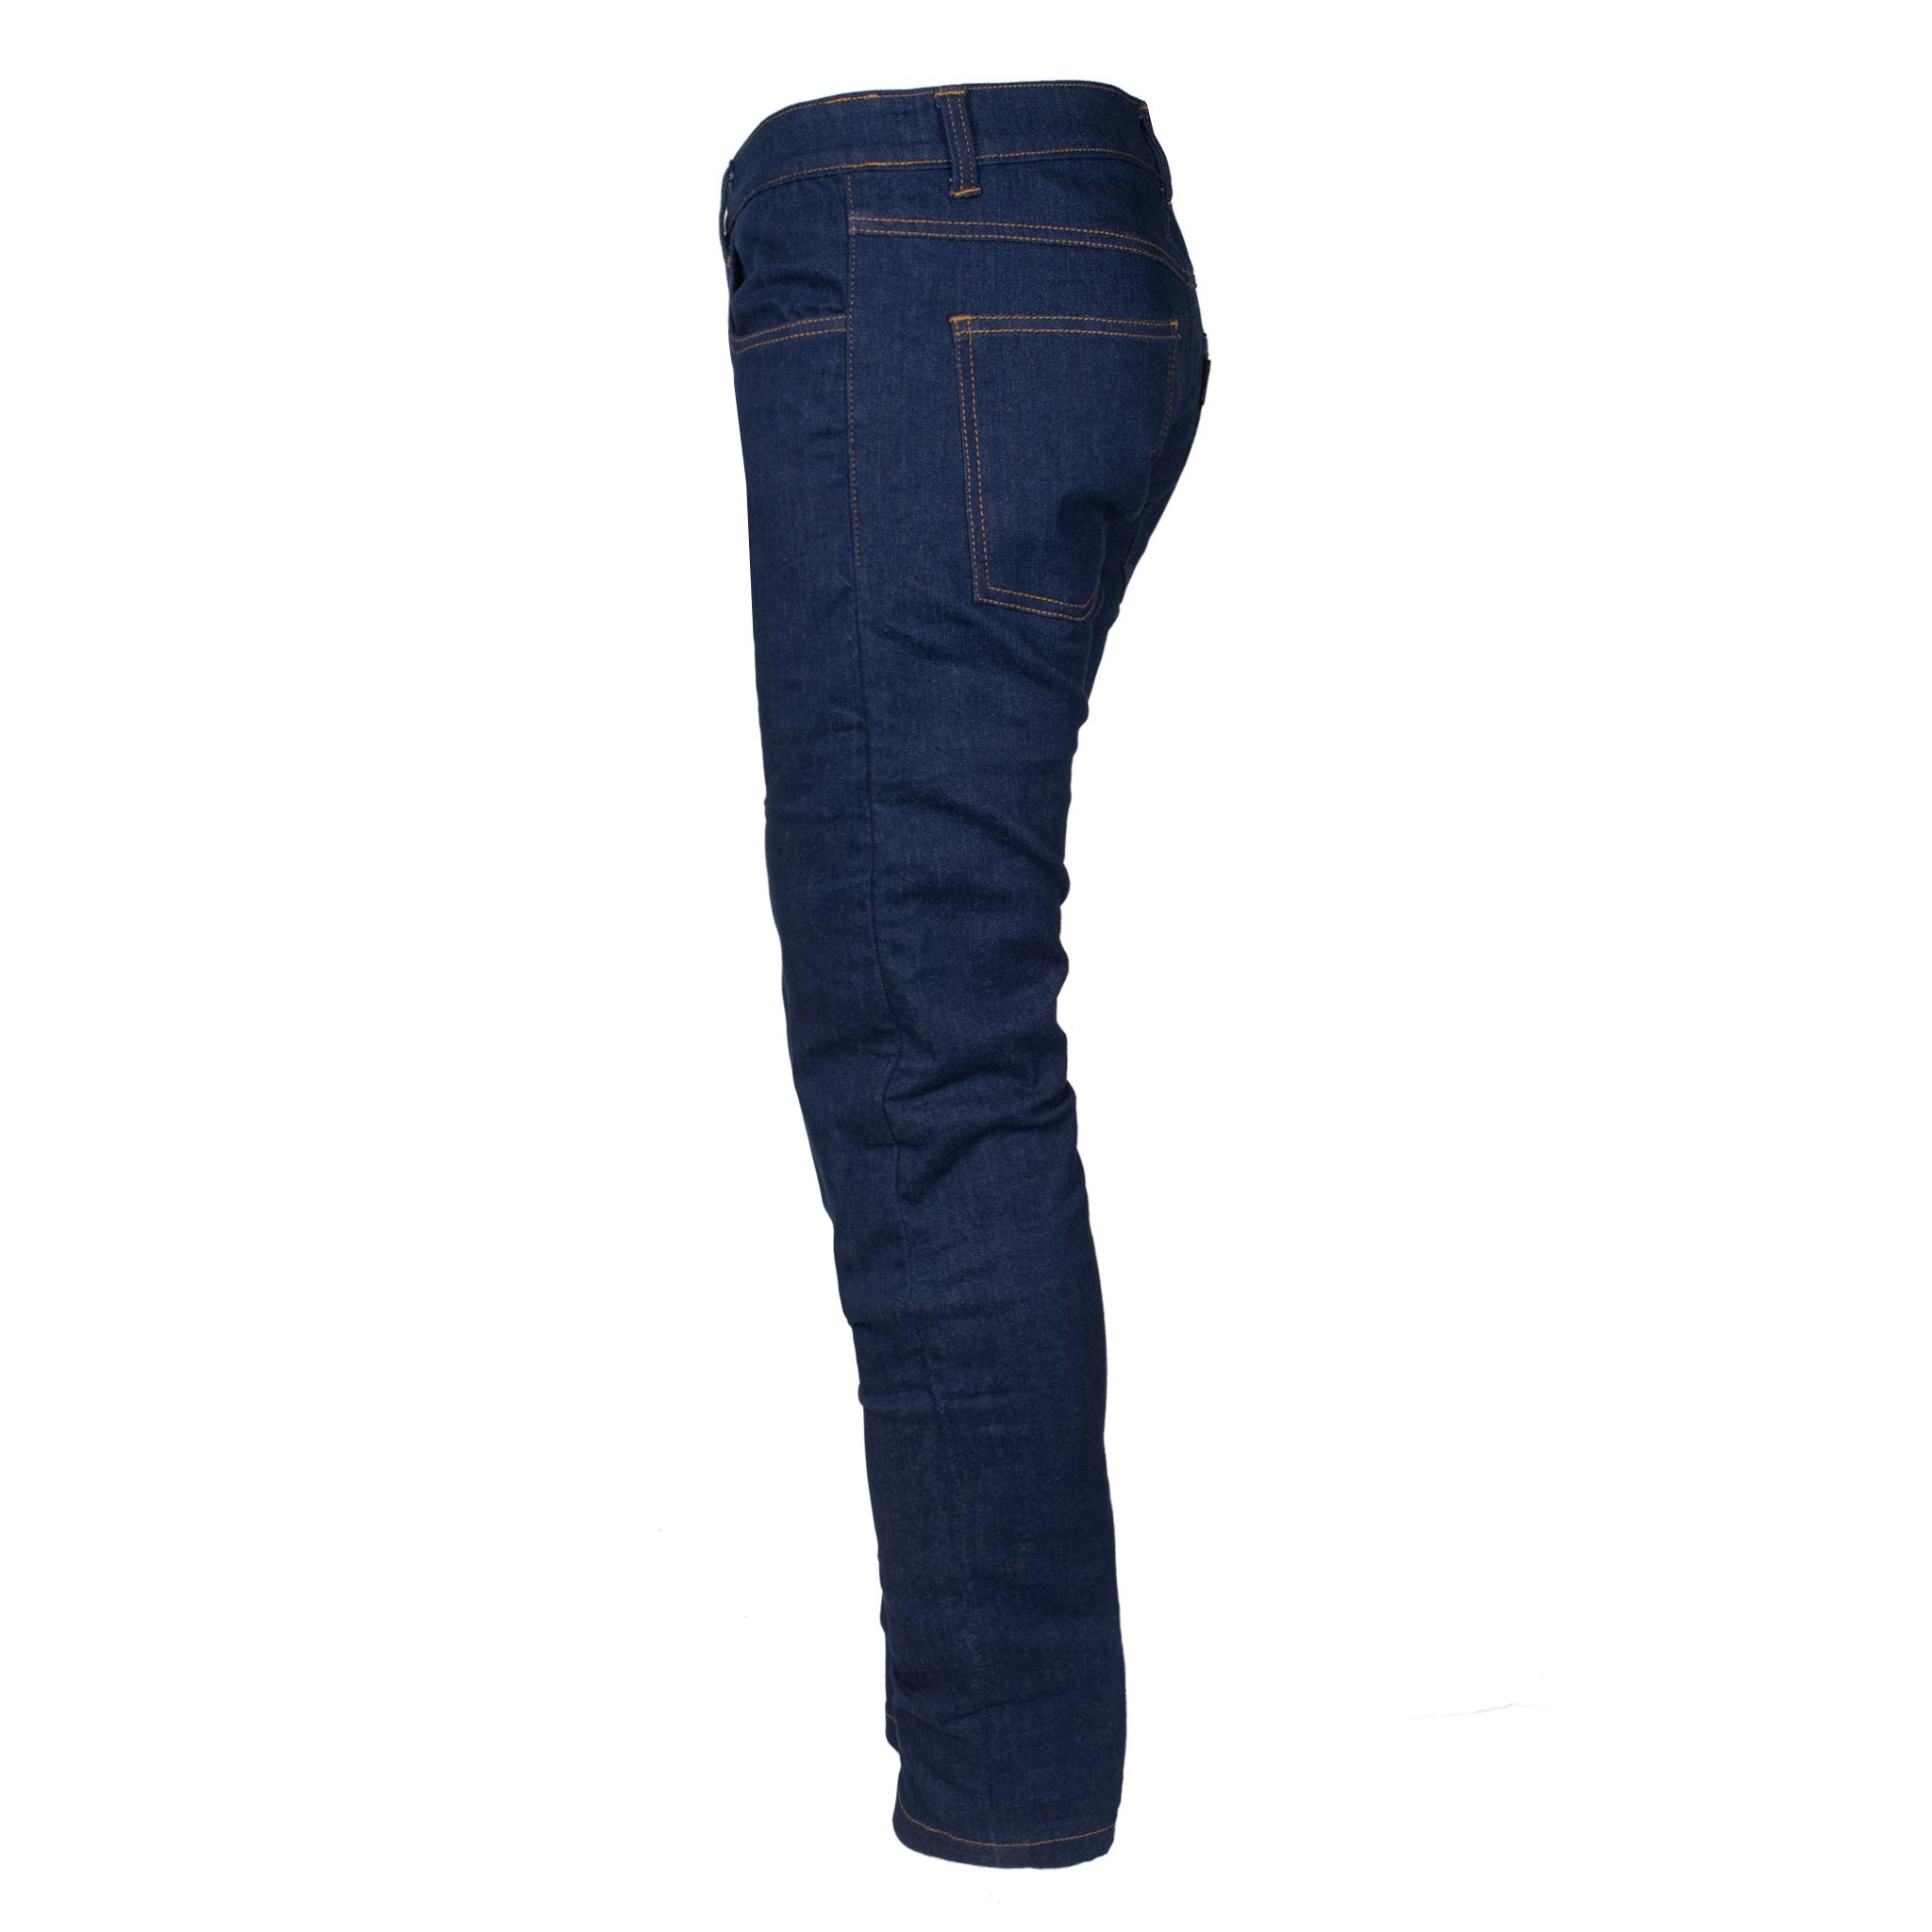 SALE Relaxed Fit Protective Jeans - Blue with Pads